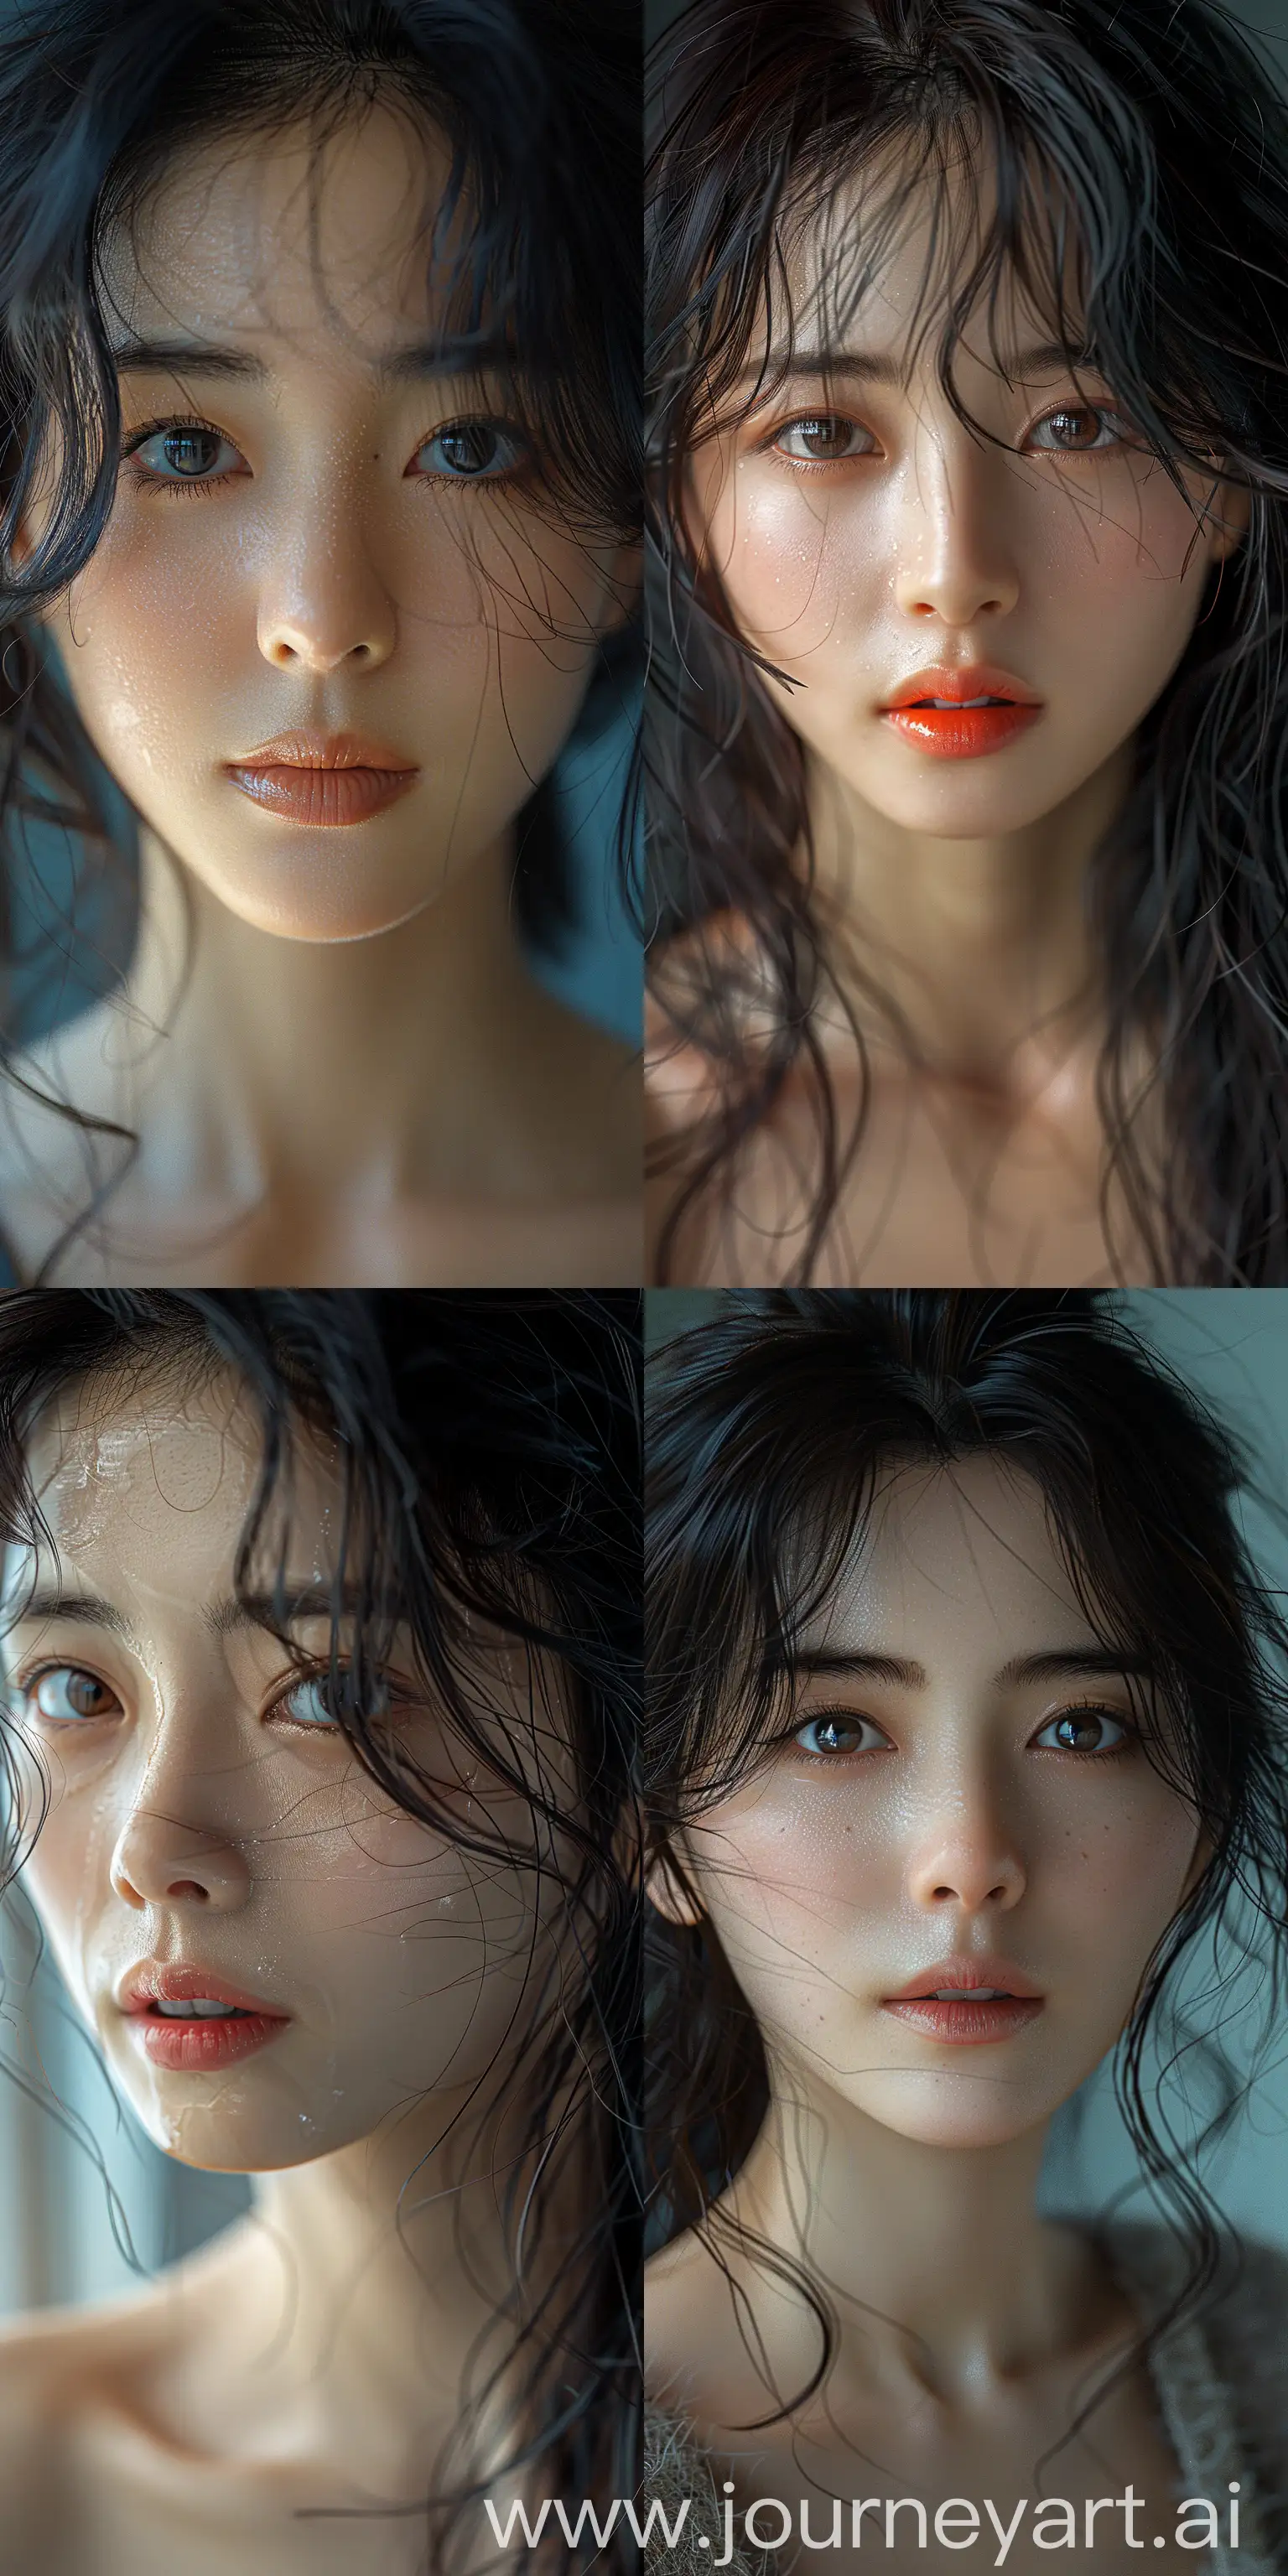 Photorealistic-CloseUp-Portrait-of-a-Korean-Woman-in-Asian-Beauty-Style